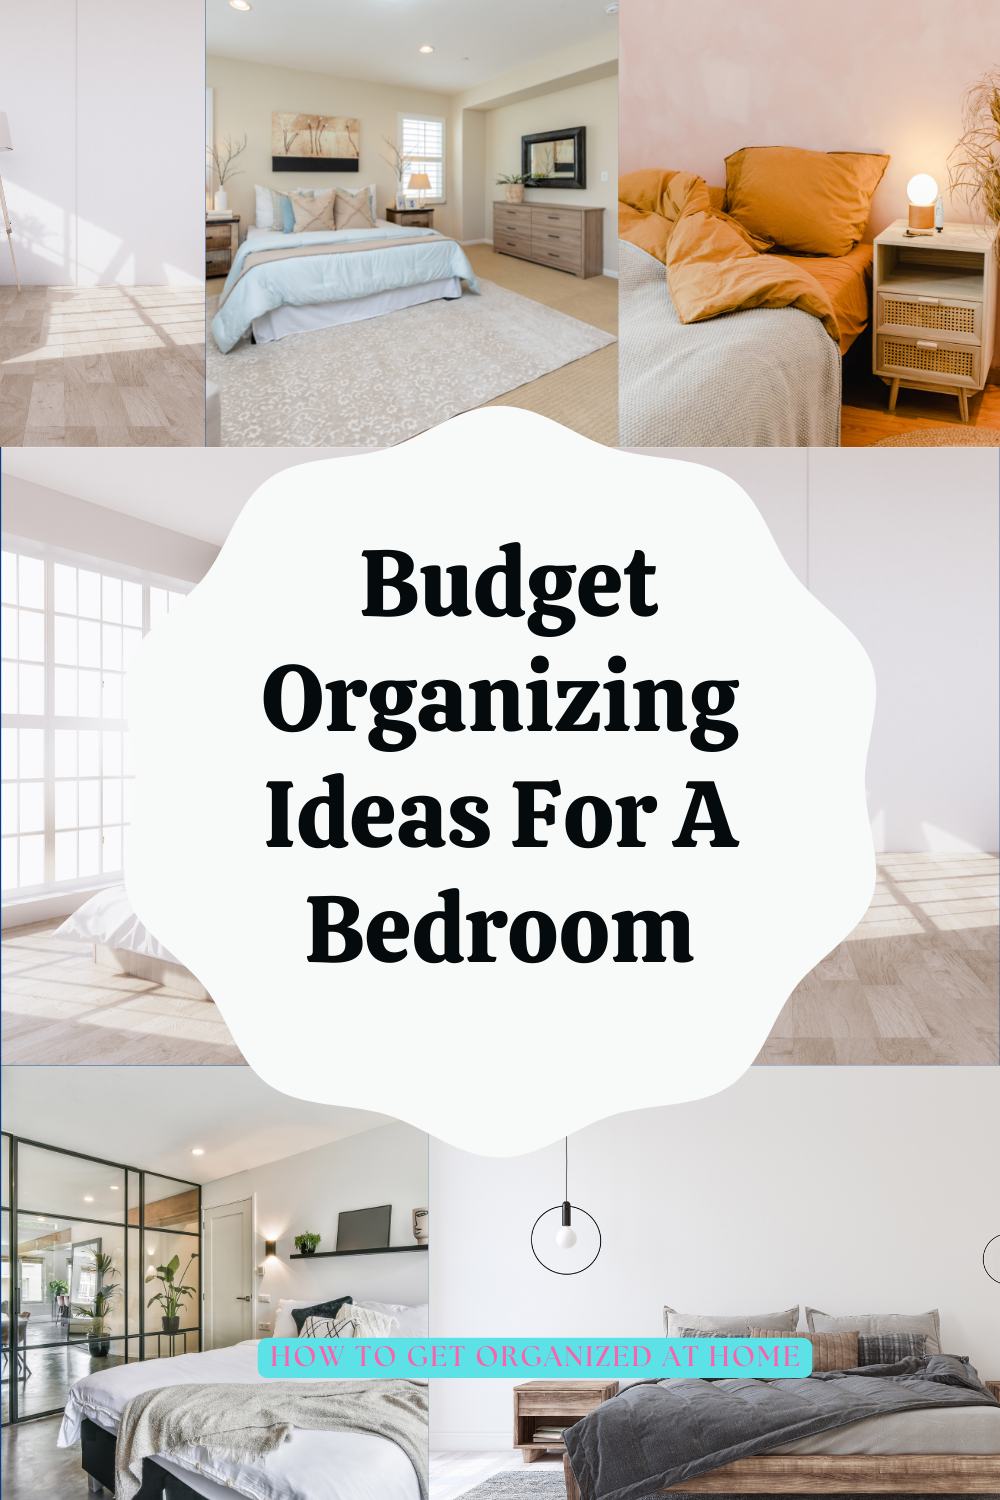 12 Ways You Can Organize Your Small Bedroom on a Small Budget